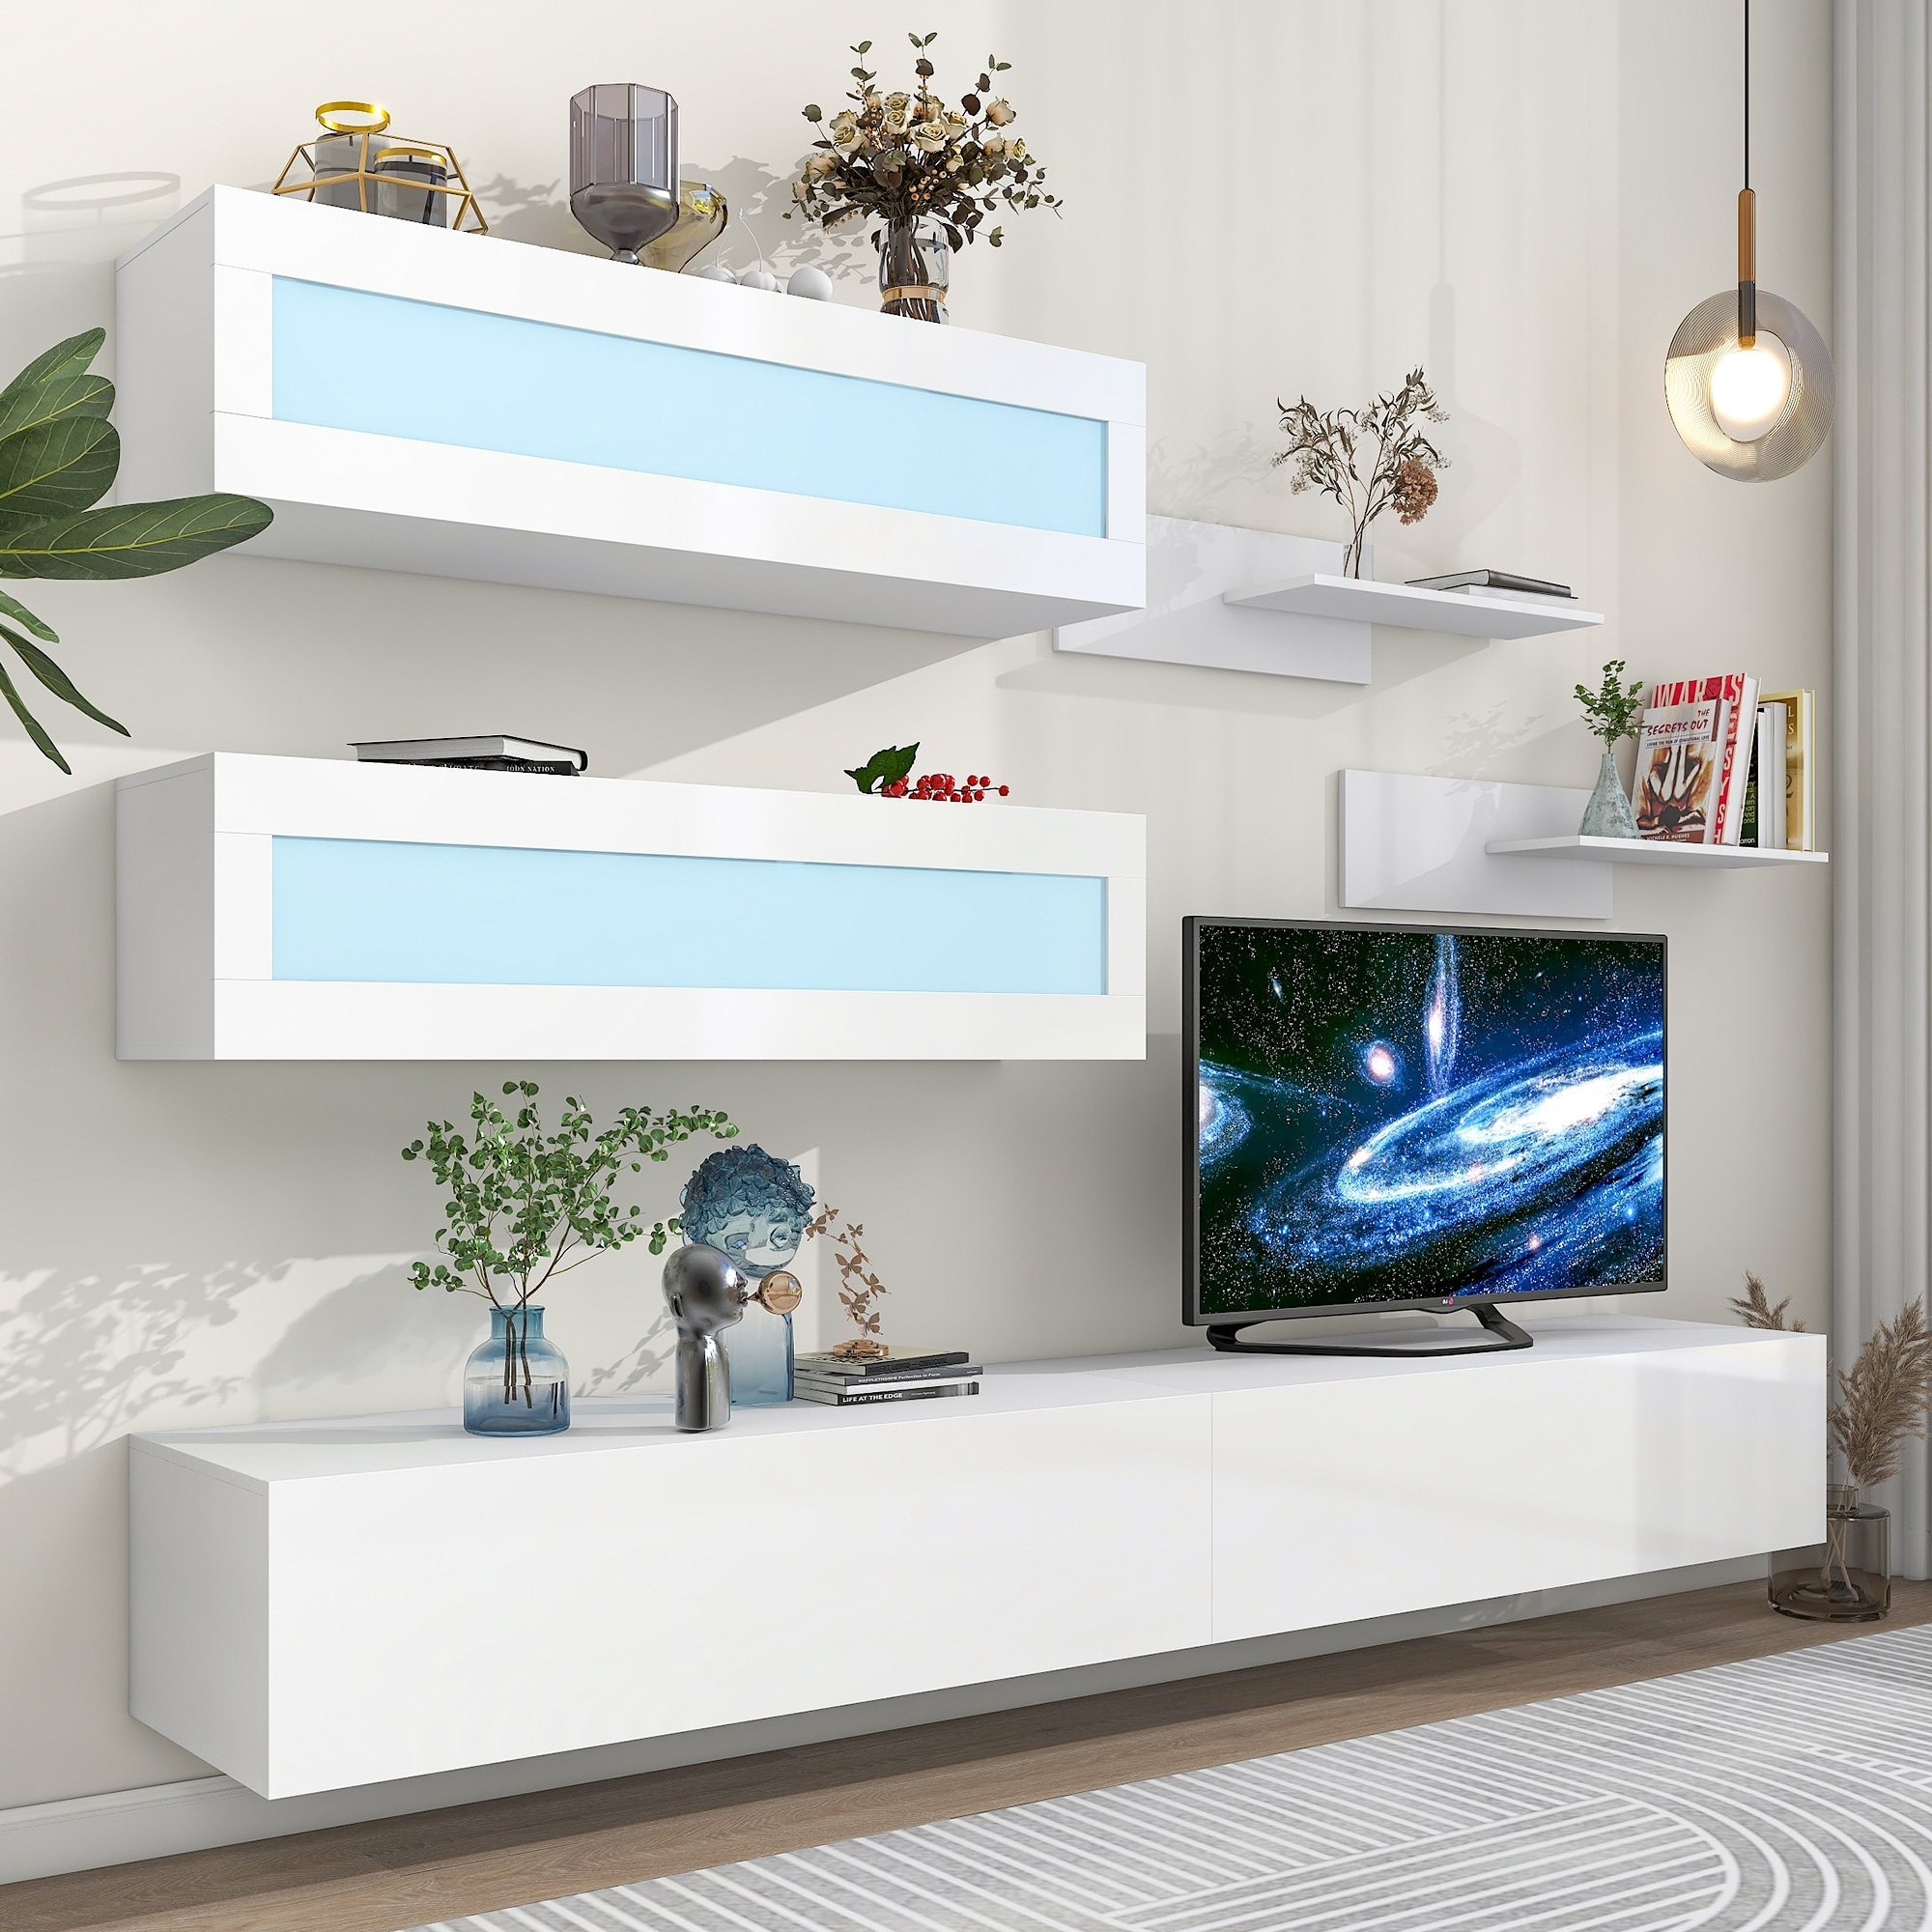 https://ak1.ostkcdn.com/images/products/is/images/direct/20198de1db706416dc5bc9874df5715969948789/Entertainment-Center-Wall-Mount-Floating-Stand-for-95%22-TV-with-4-Media-Storage-Cabinets-and-2-Shelves-16-Color-RGB-LED-Light.jpg